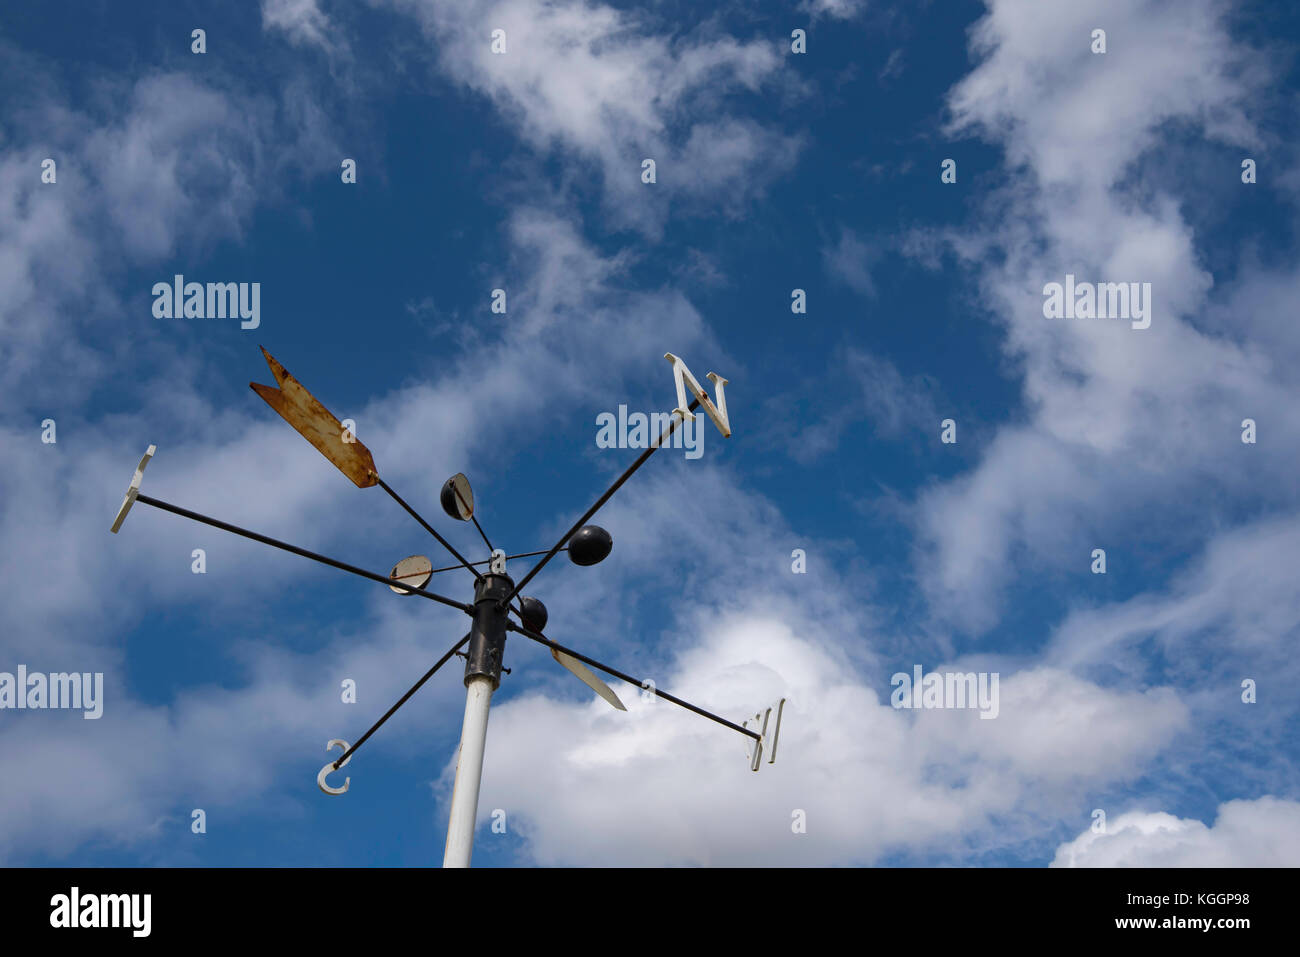 Looking up at an old weather vane Stock Photo